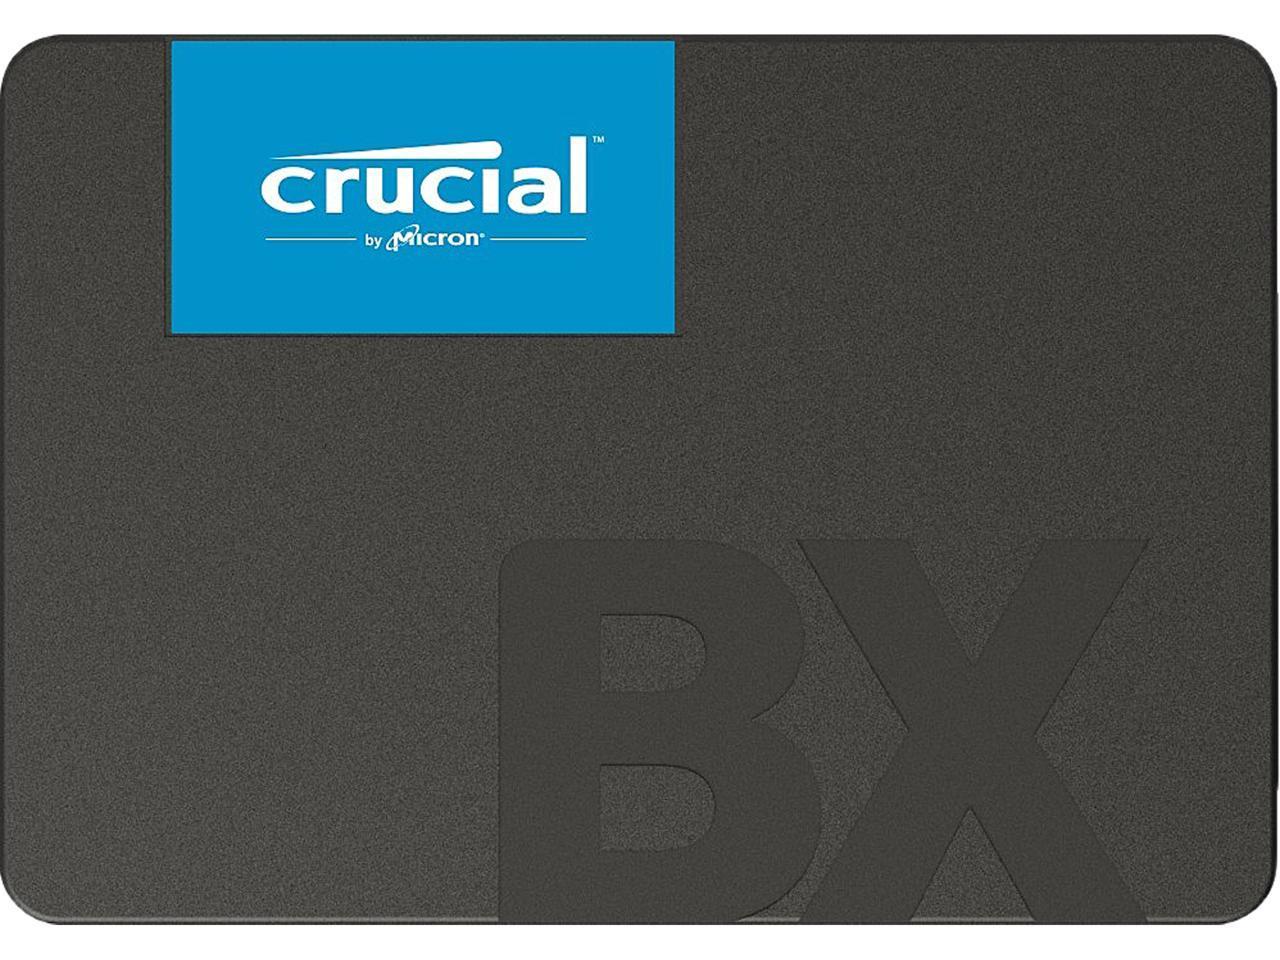 1TB Crucial BX500 2.5in SSD for $79.99 Shipped